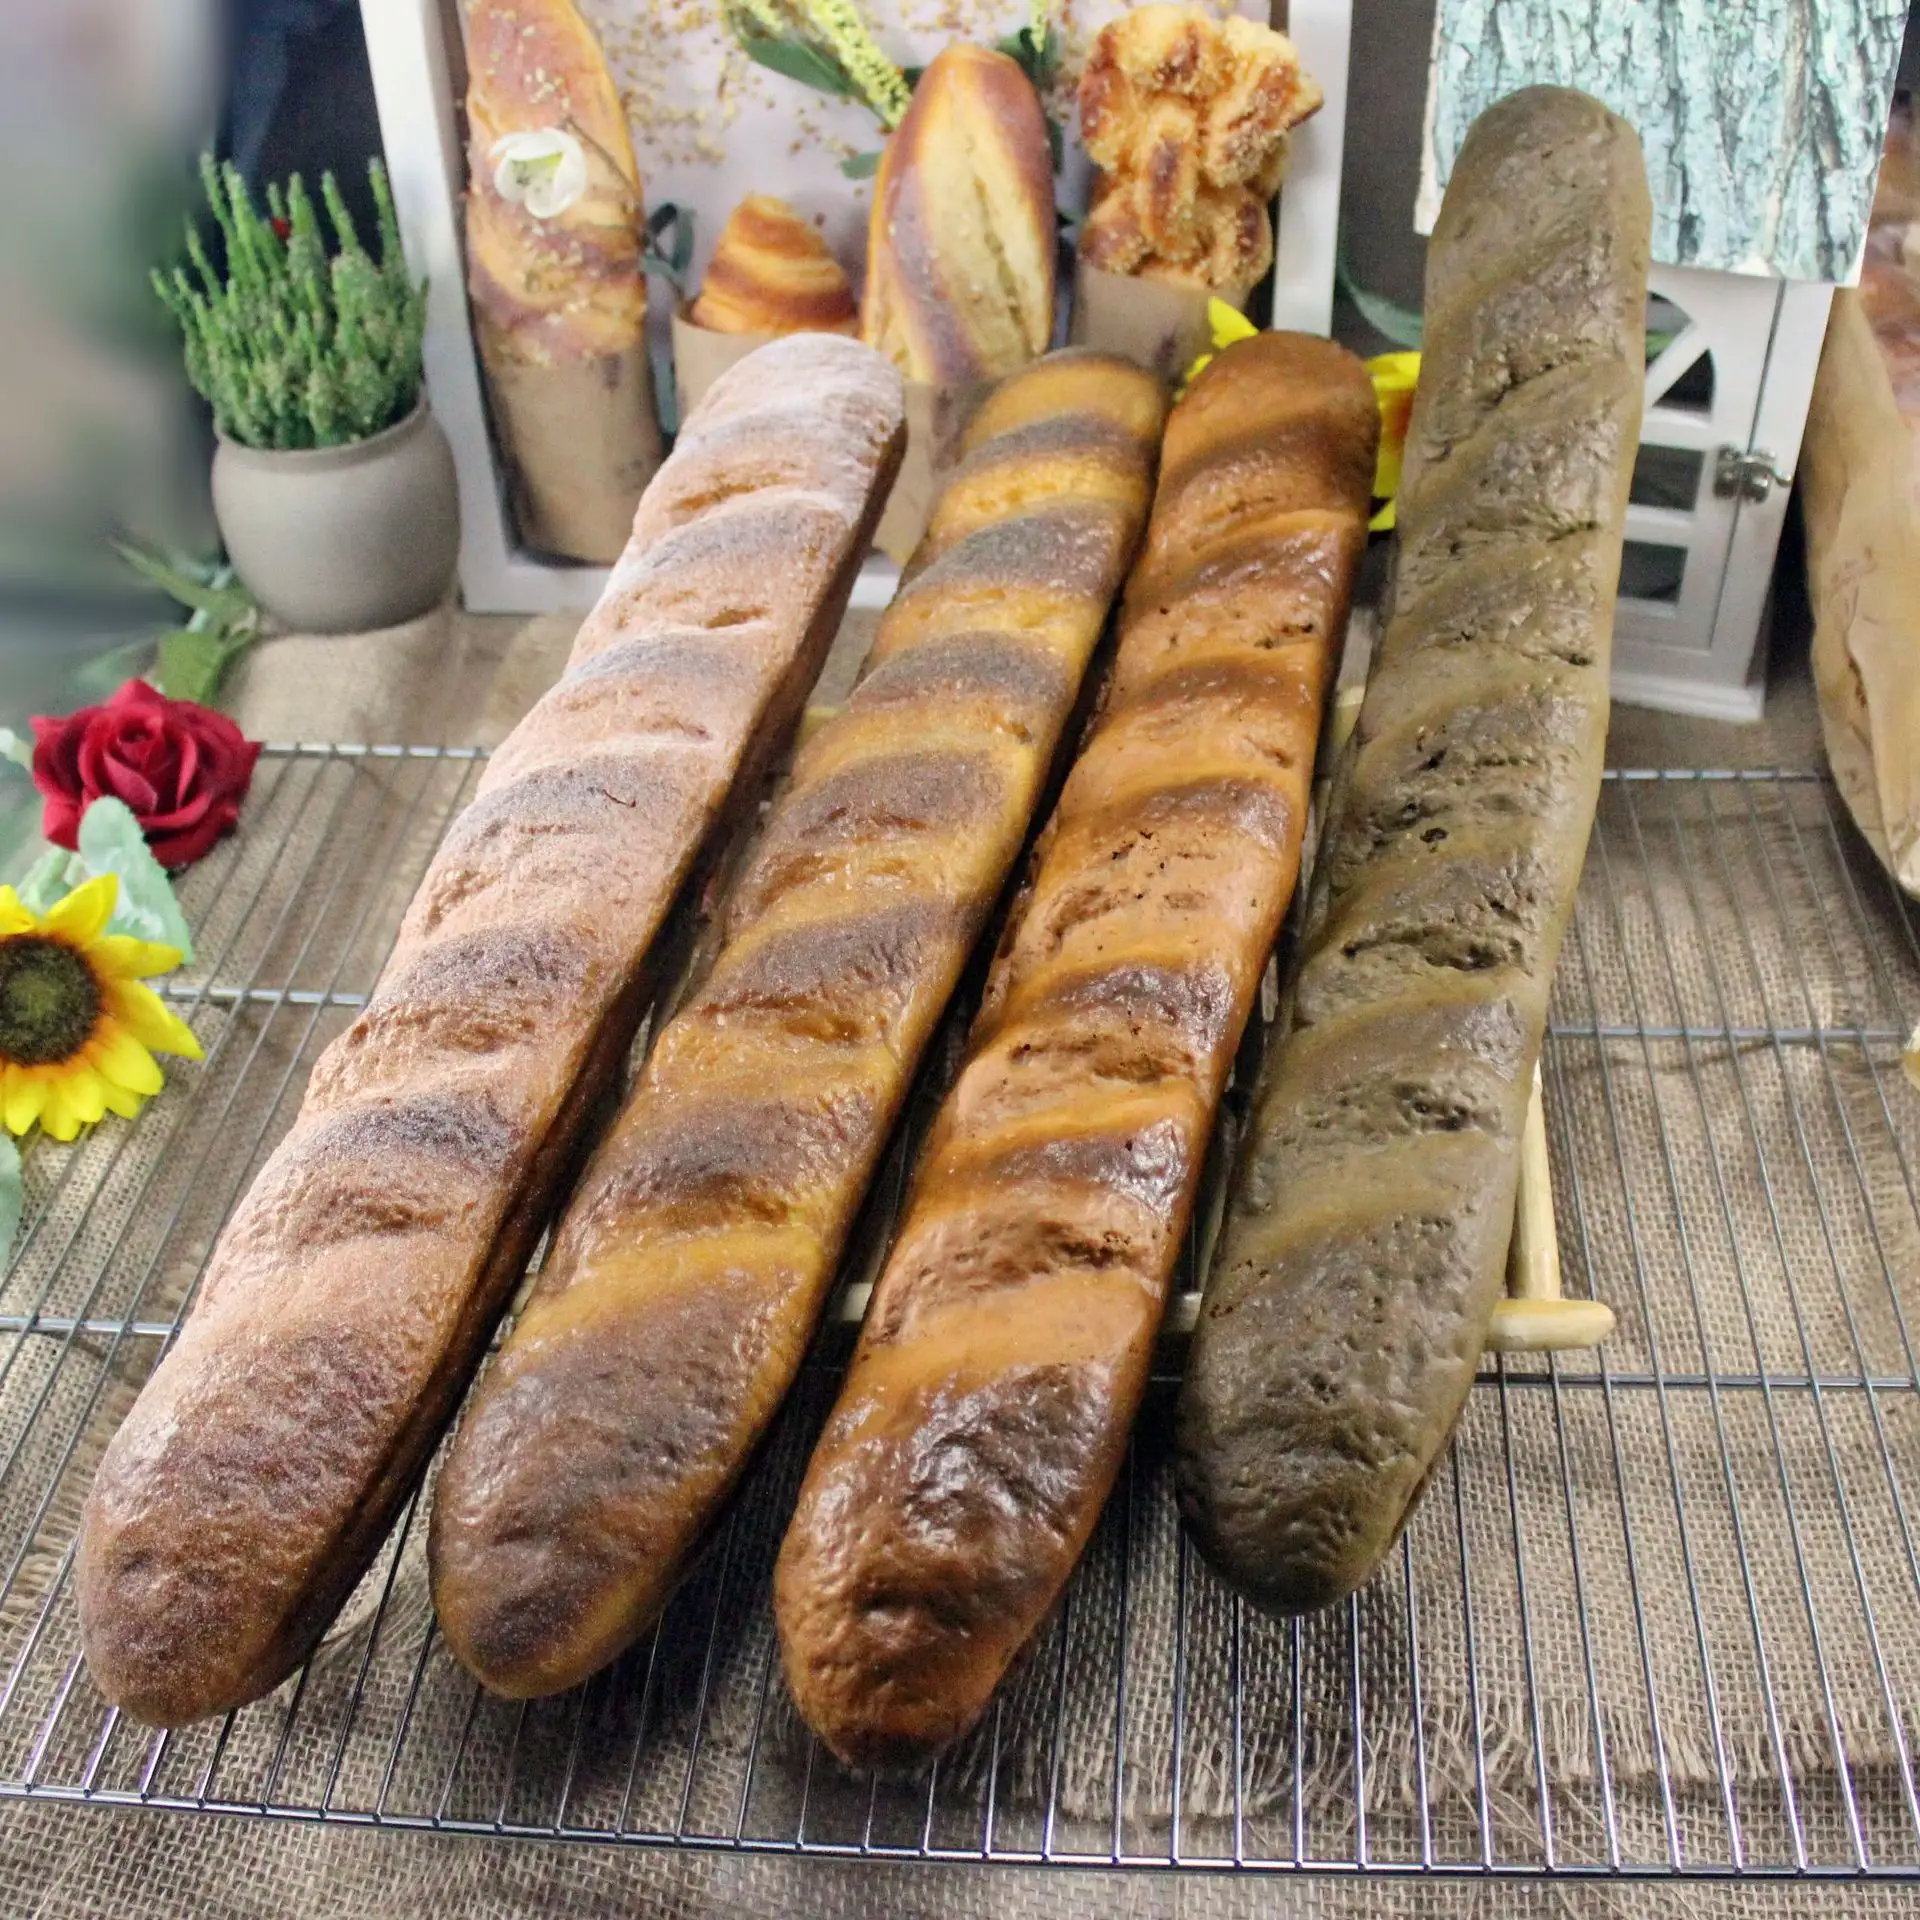 2404 Production custom big bread model new peculiar home decoration window display film props scenery quality and low price